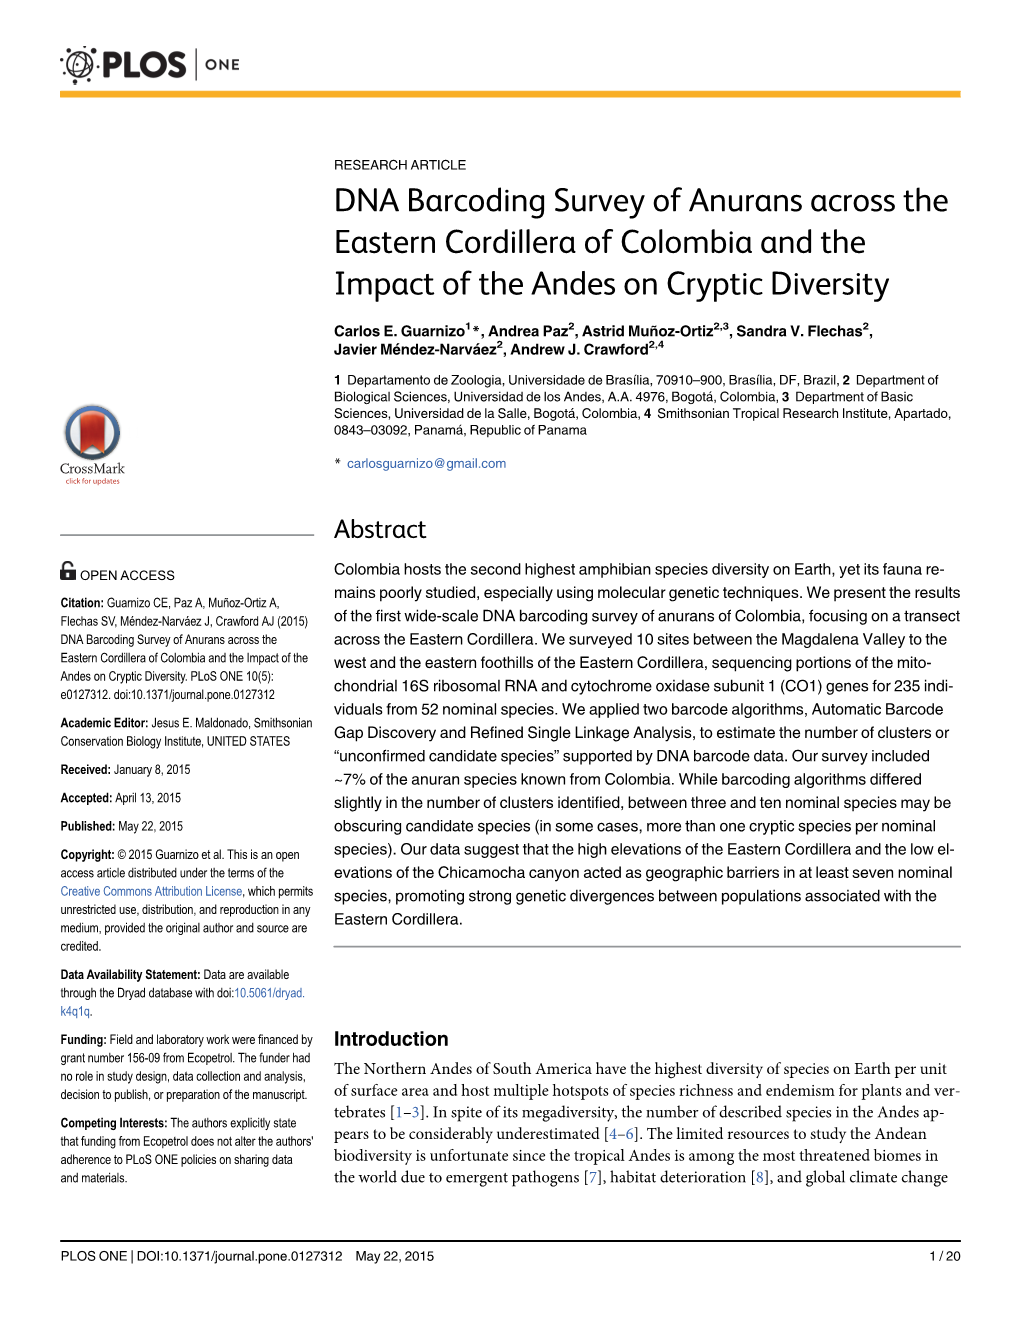 DNA Barcoding Survey of Anurans Across the Eastern Cordillera of Colombia and the Impact of the Andes on Cryptic Diversity